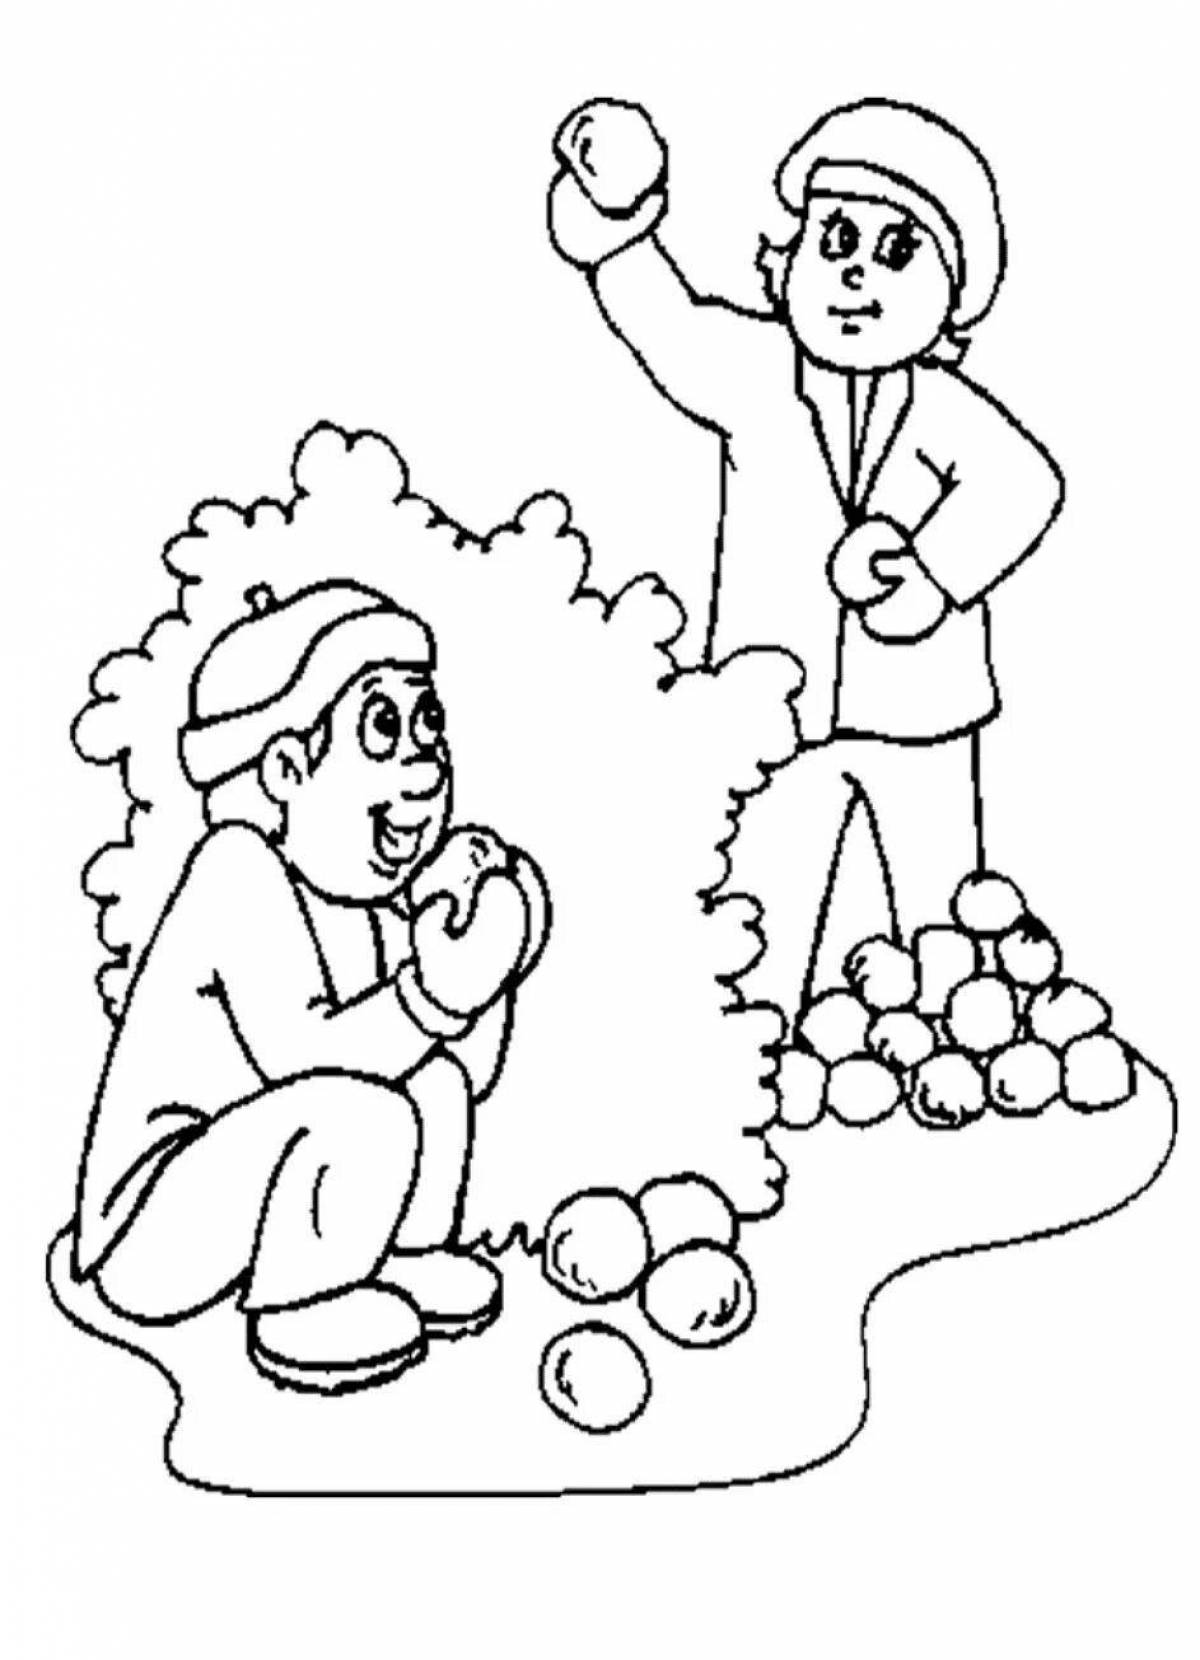 Great snowball coloring for kids